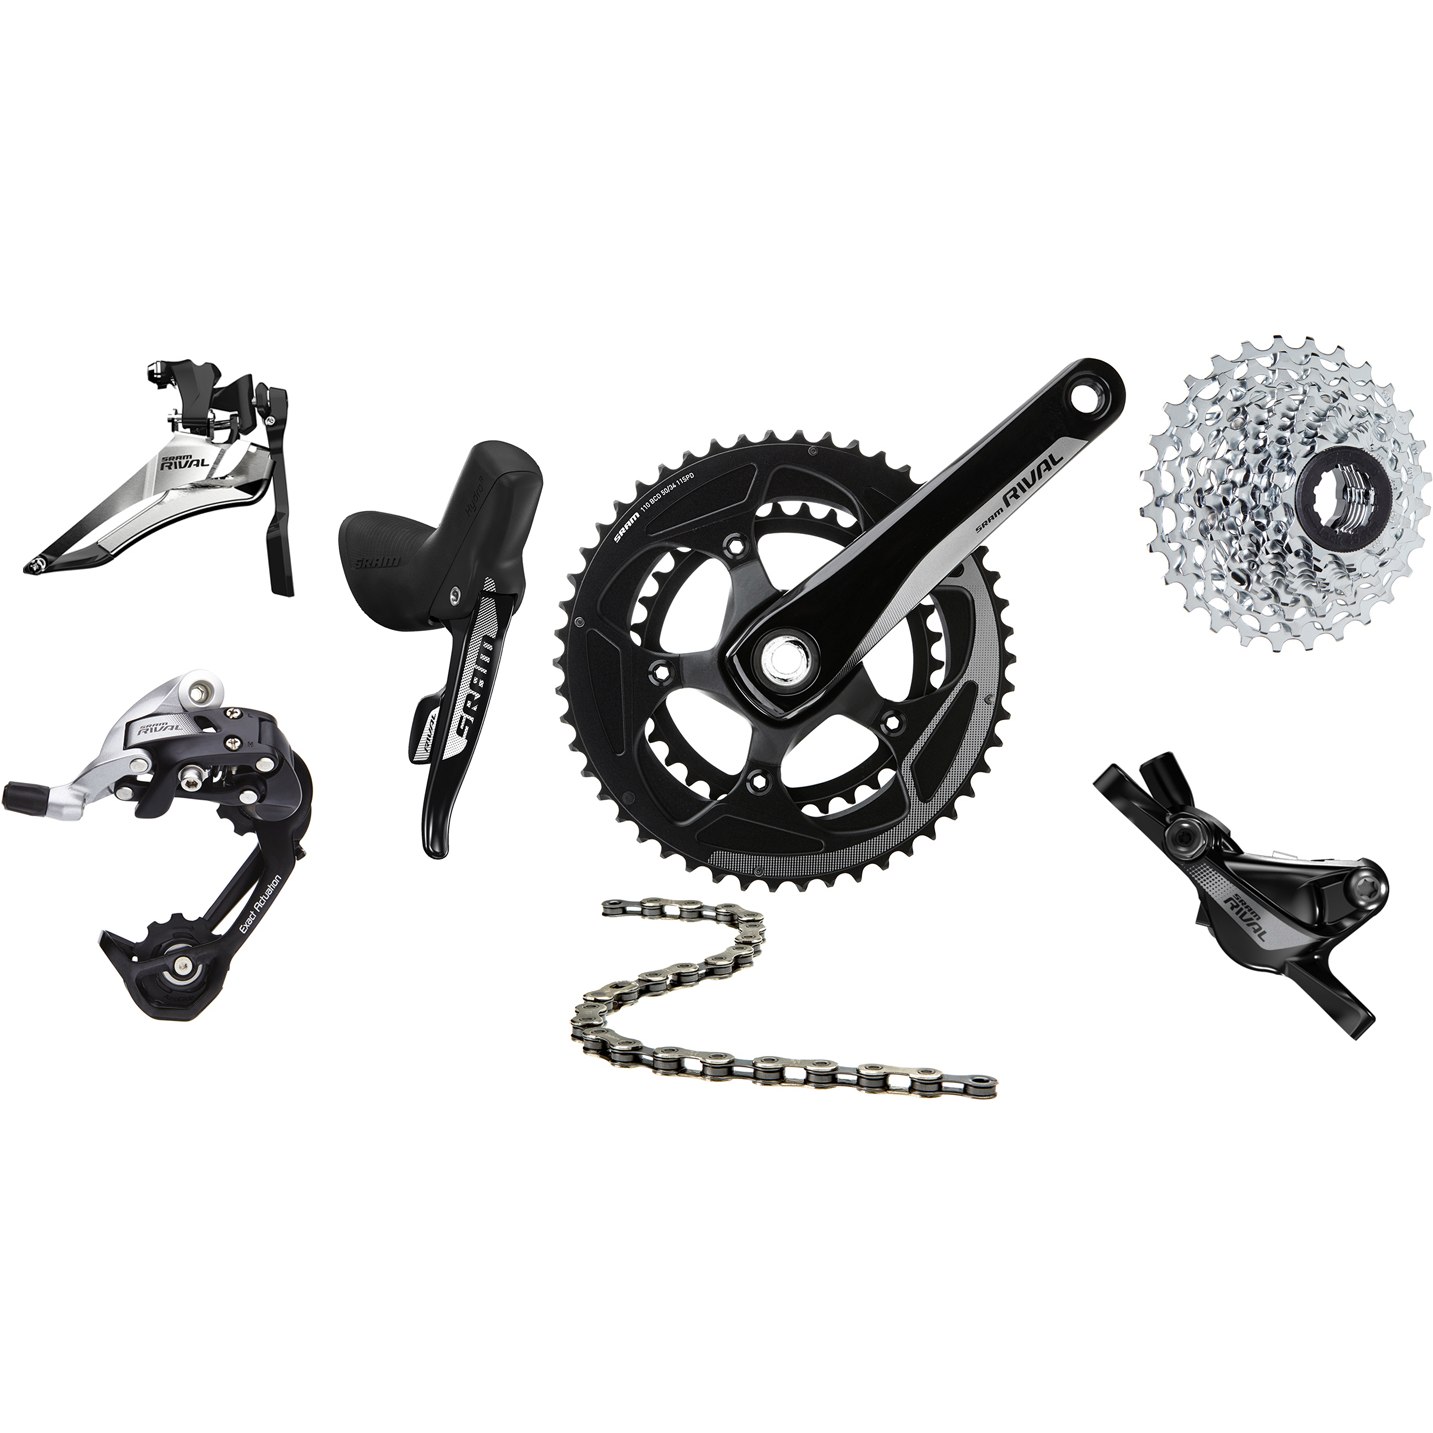 Image of SRAM Rival 22 Groupset 2x11 compact - GXP - with hydraulic Disc Brakes